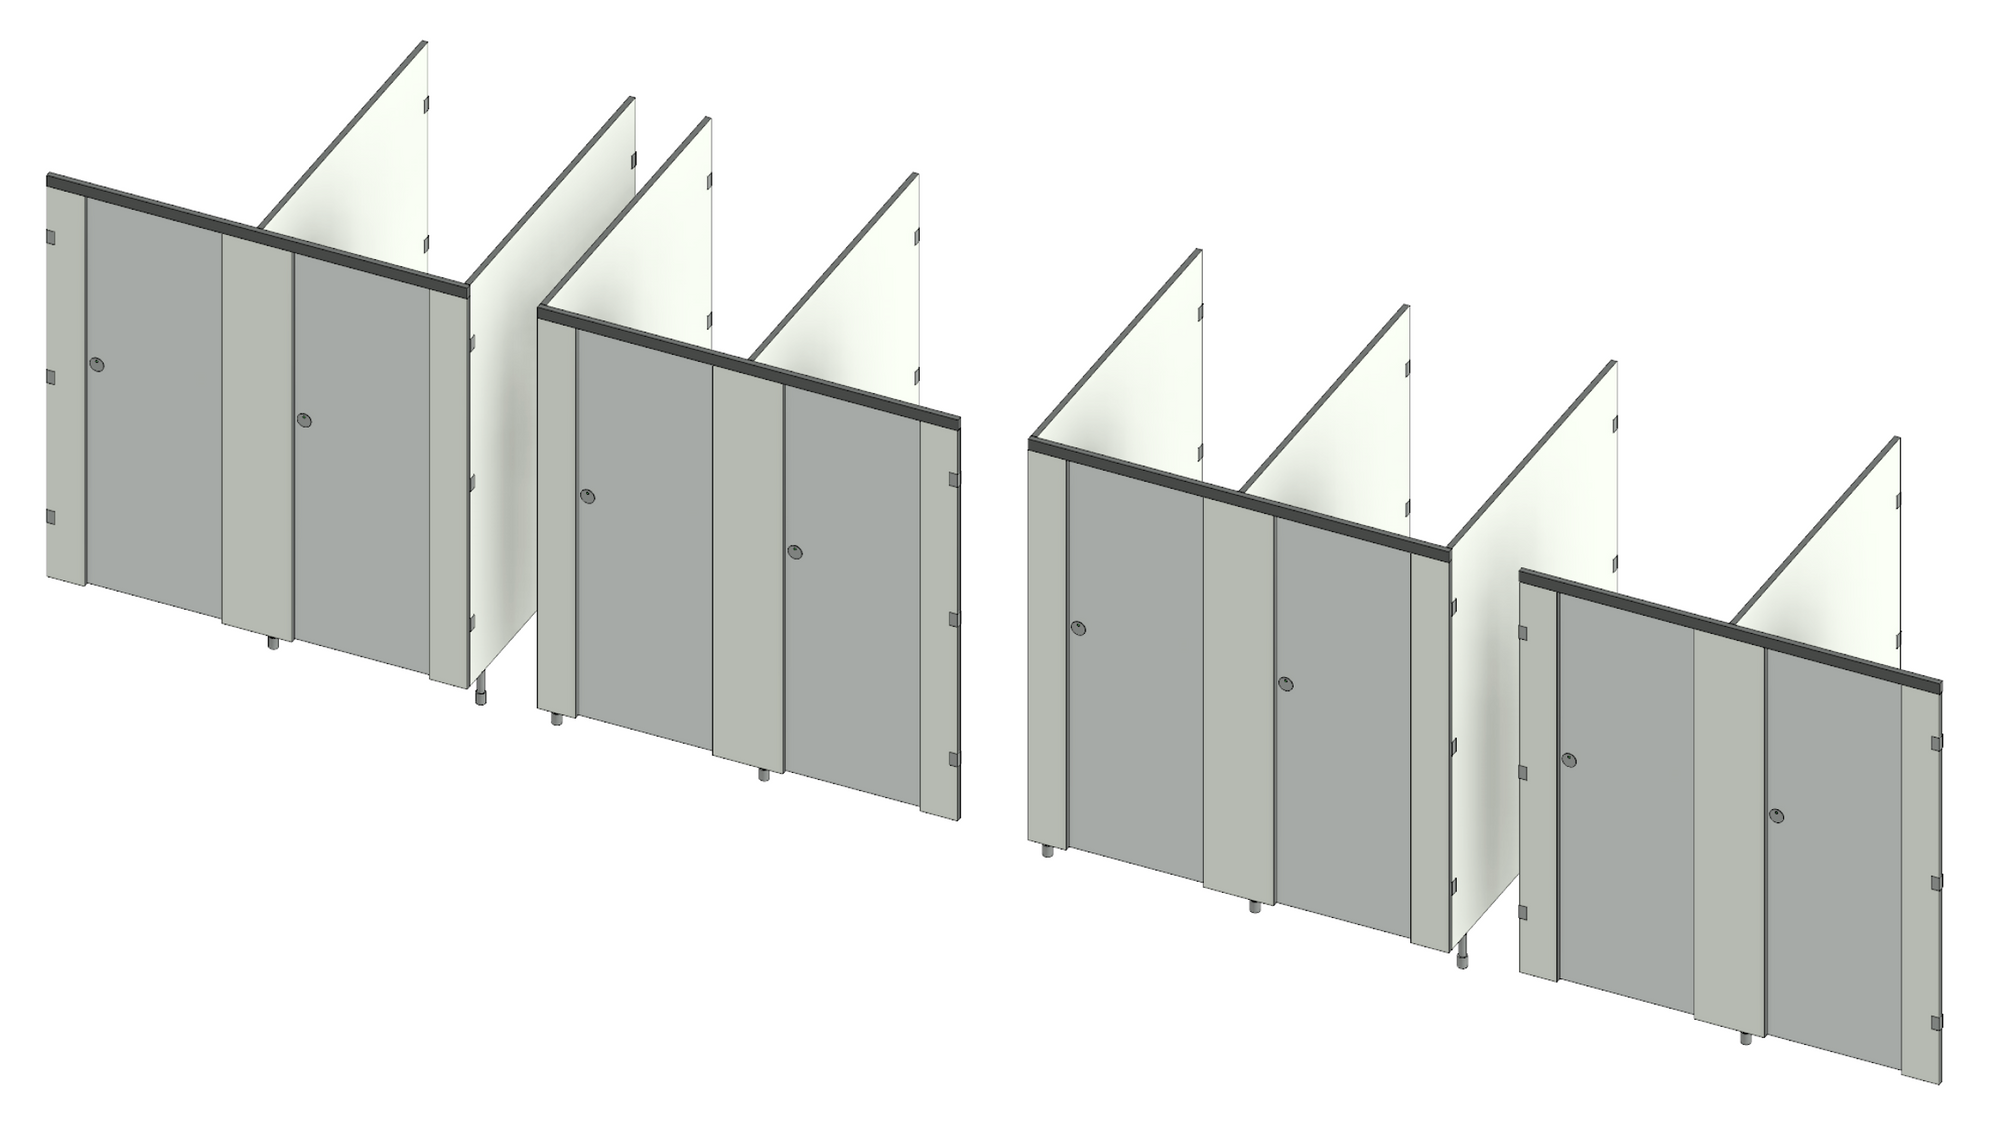 3D view showing left-hand run, right-hand run, island and enclosed bathroom stall Revit families.